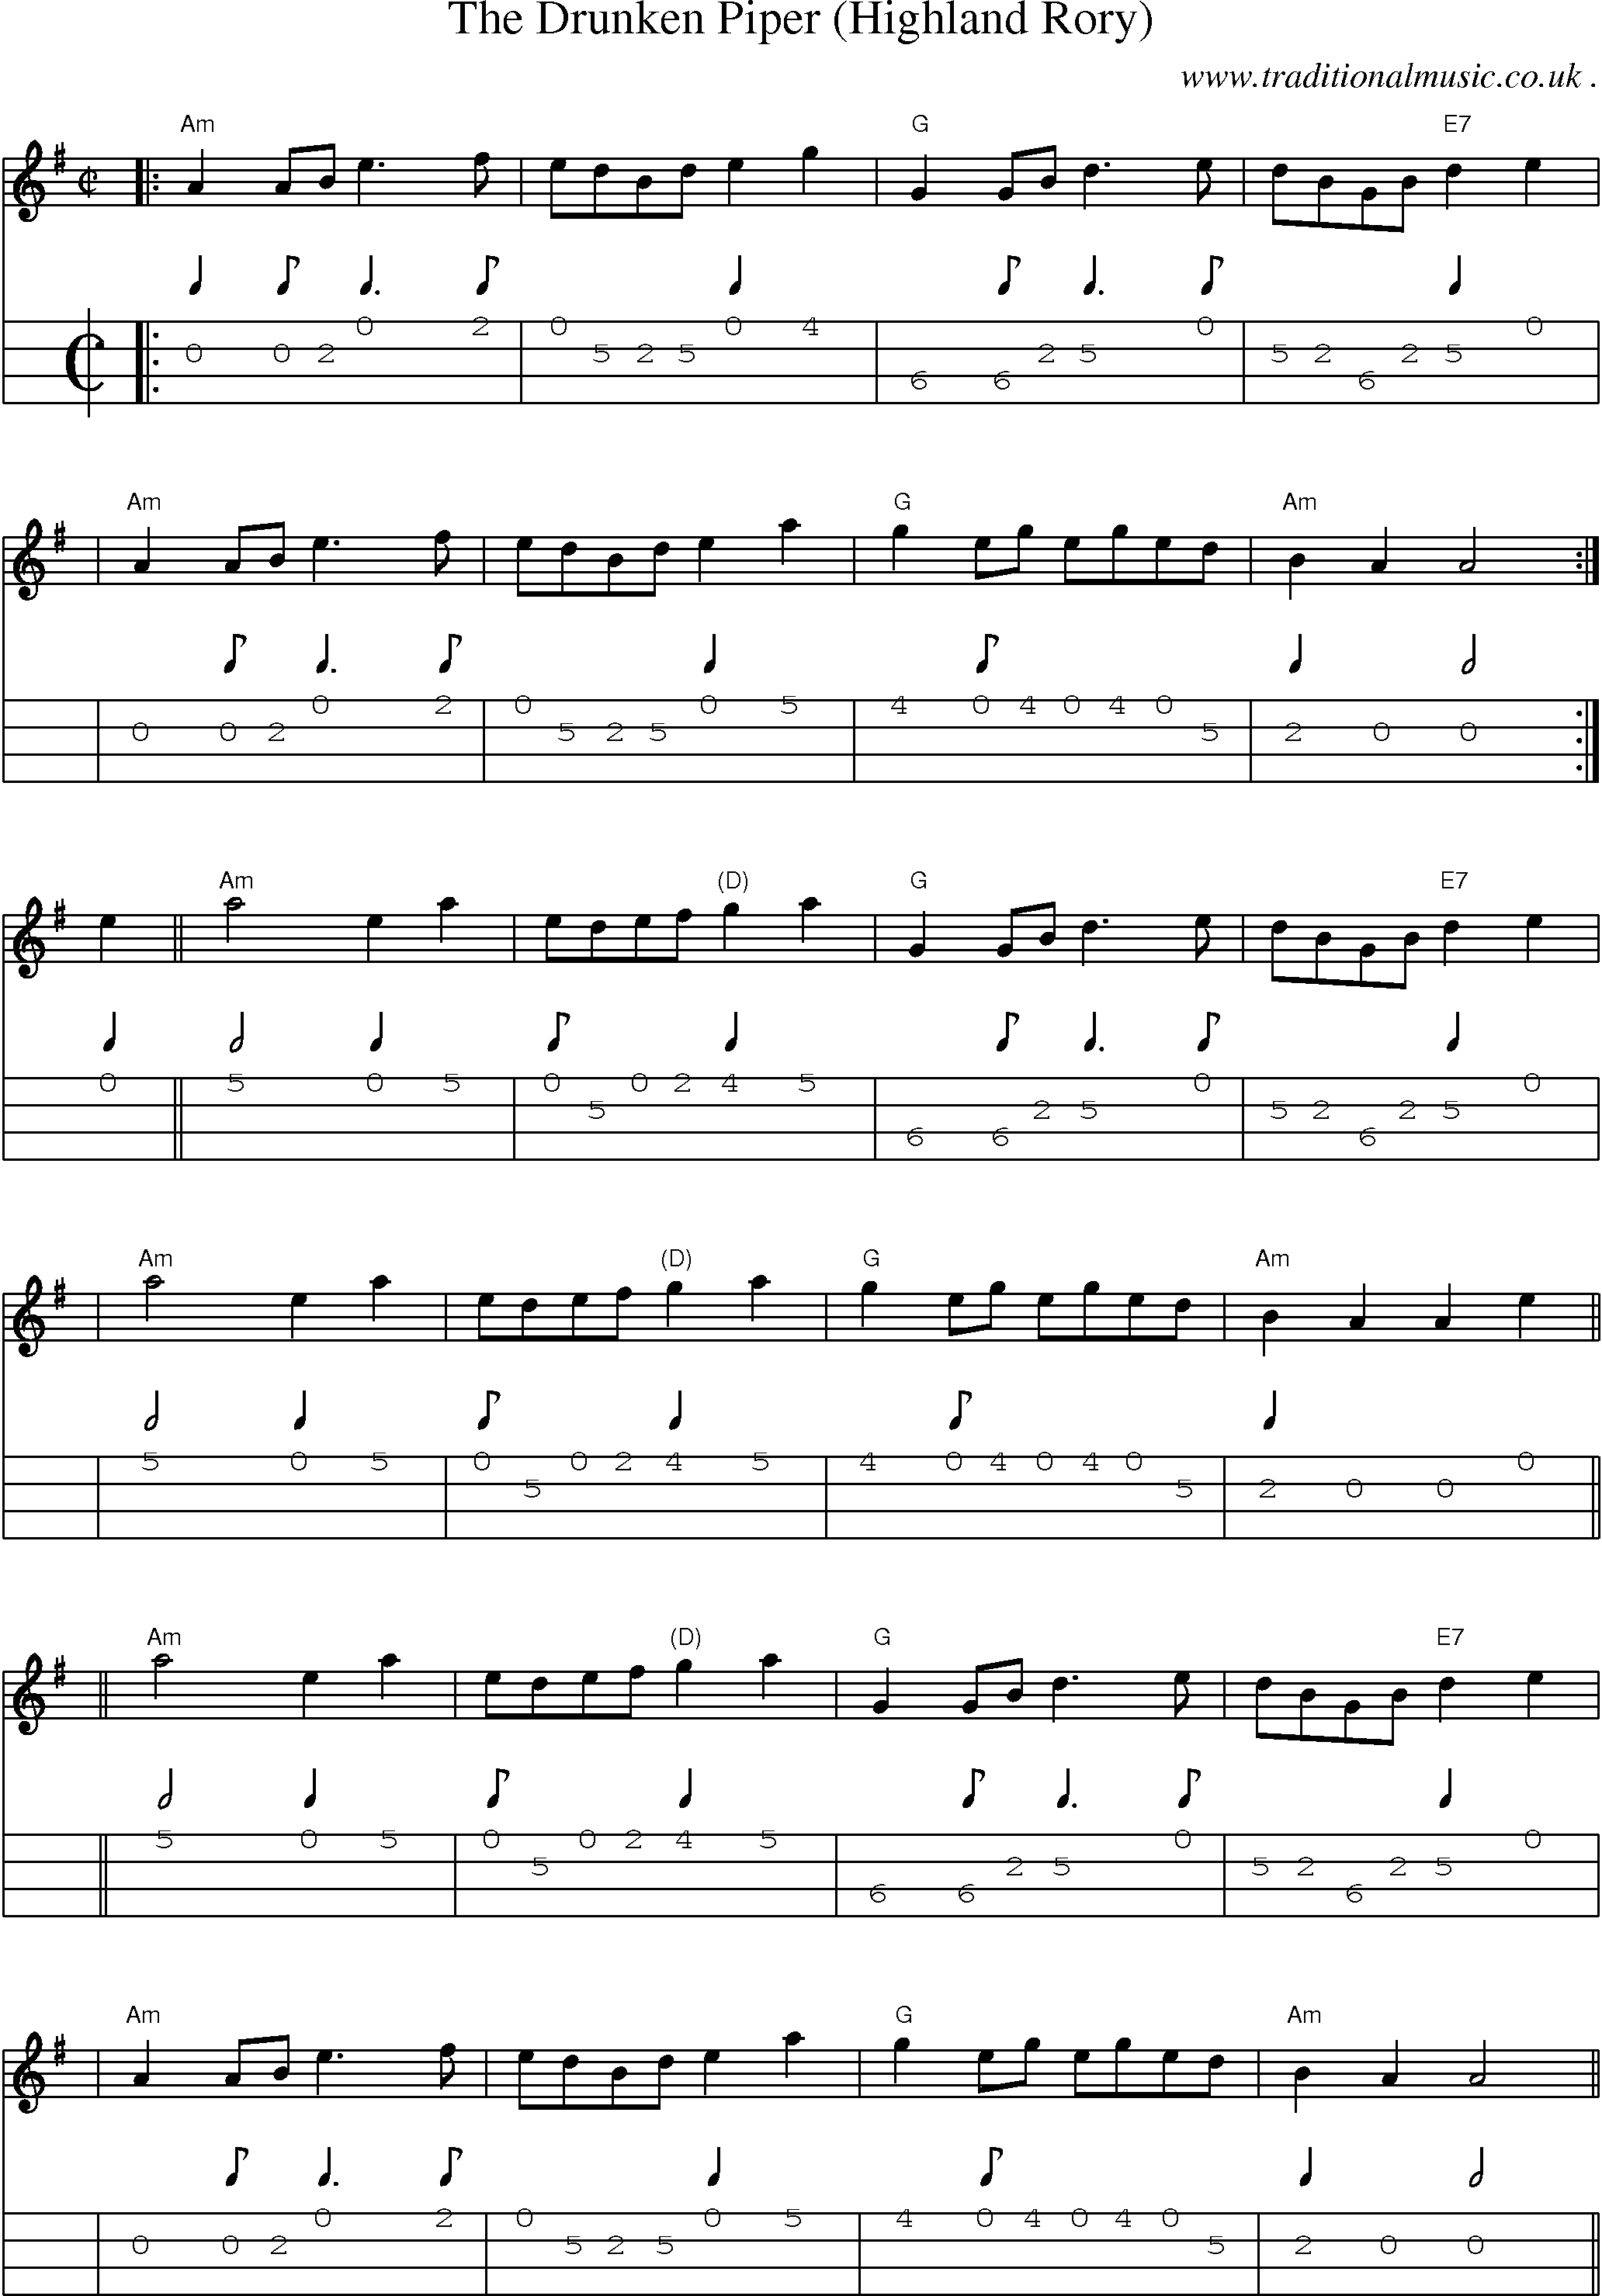 Sheet-Music and Mandolin Tabs for The Drunken Piper (highland Rory)